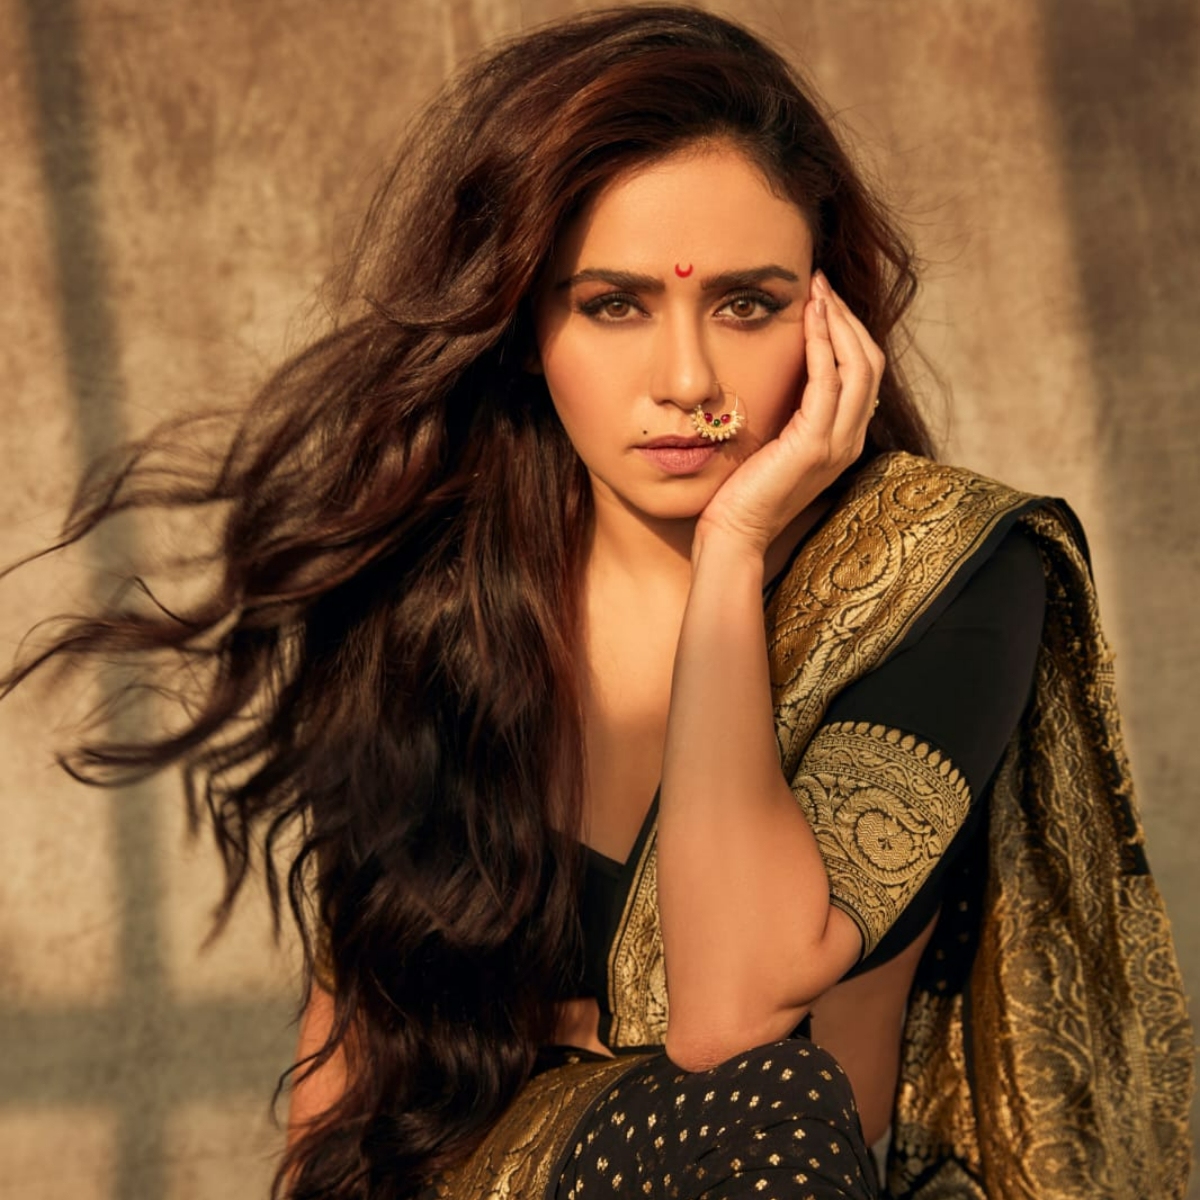 Jhalak Dikhhla Jaa 10's Amruta Khanvilkar: Madhuri Dixit as judge is most attractive thing for me; EXCLUSIVE